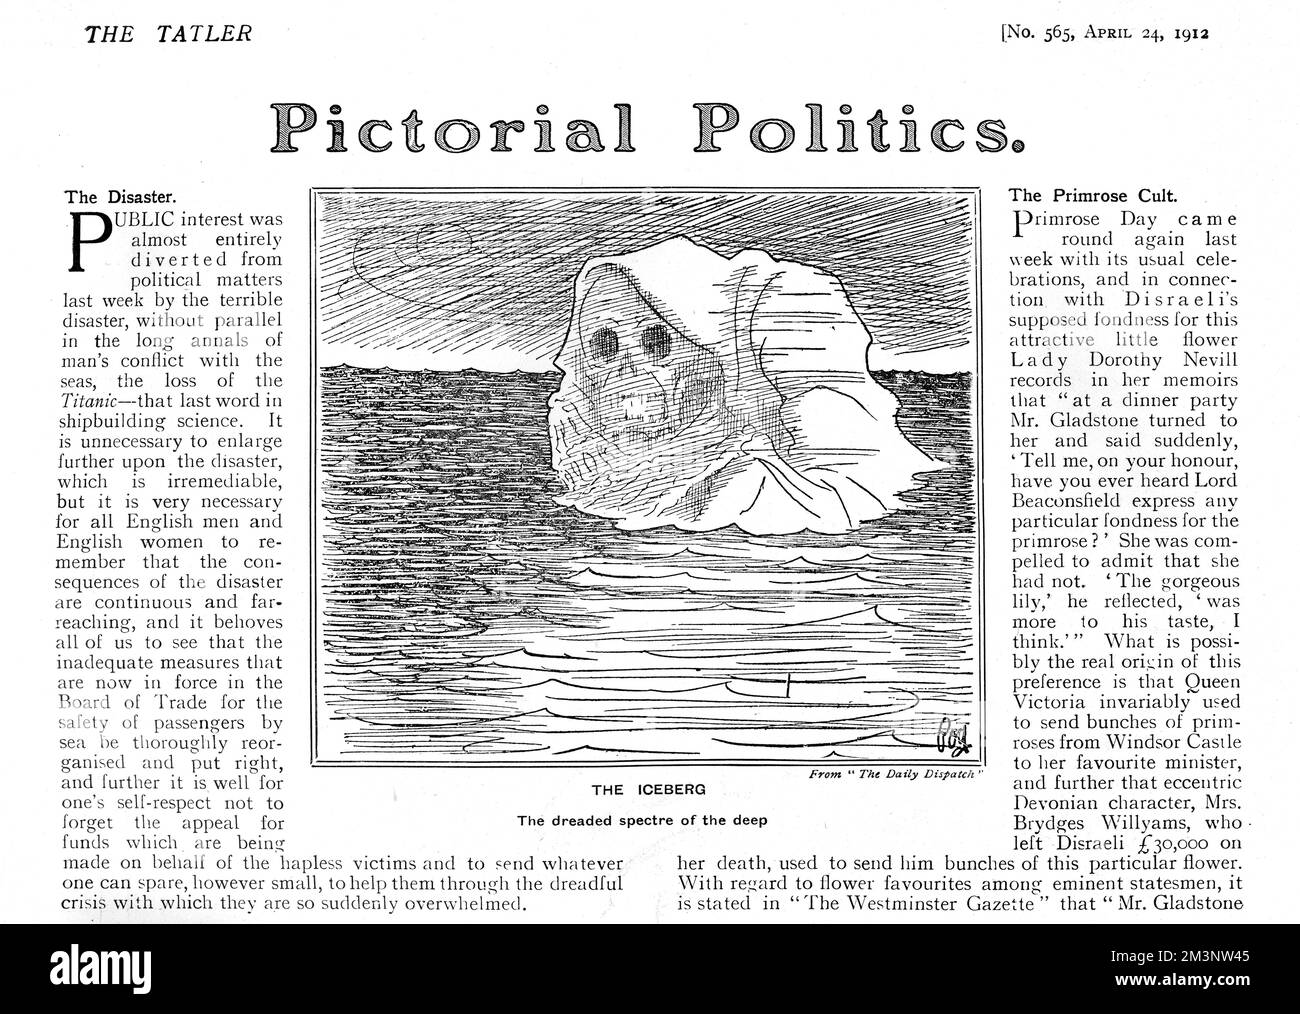 Page from the Tatler, featuring a comment about the dreadful tragedy of the sinking of the Titanic in April 1912, illustrated by a cartoon by Pog, from the Daily Dispatch showing the offending iceberg drawn as a sceptre of death, waiting in the Atlantic ocean for approaching victims.     Date: 1912 Stock Photo